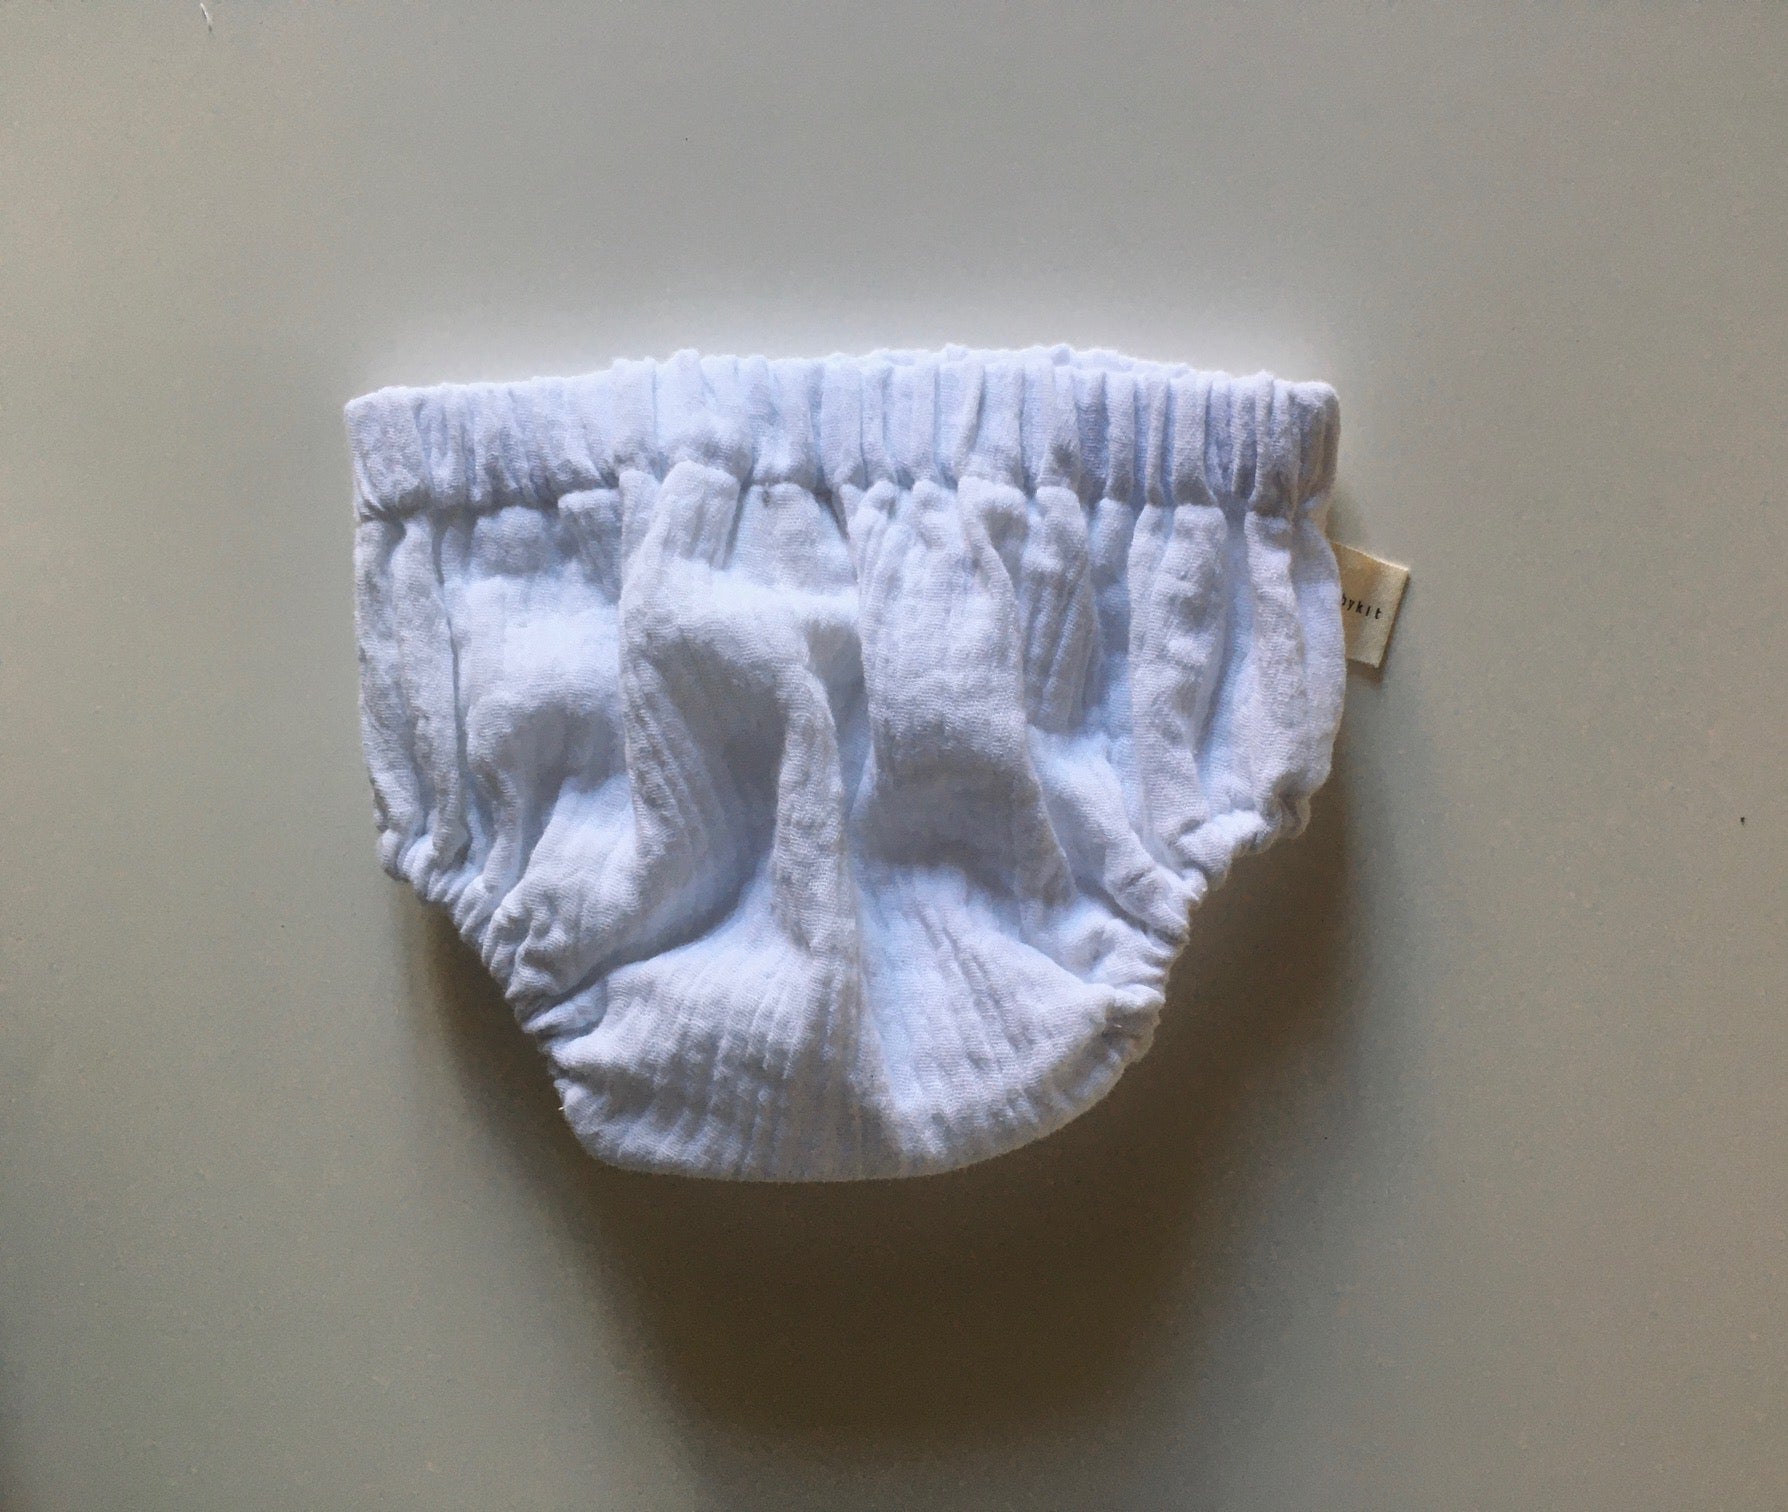 Organic cotton diapers